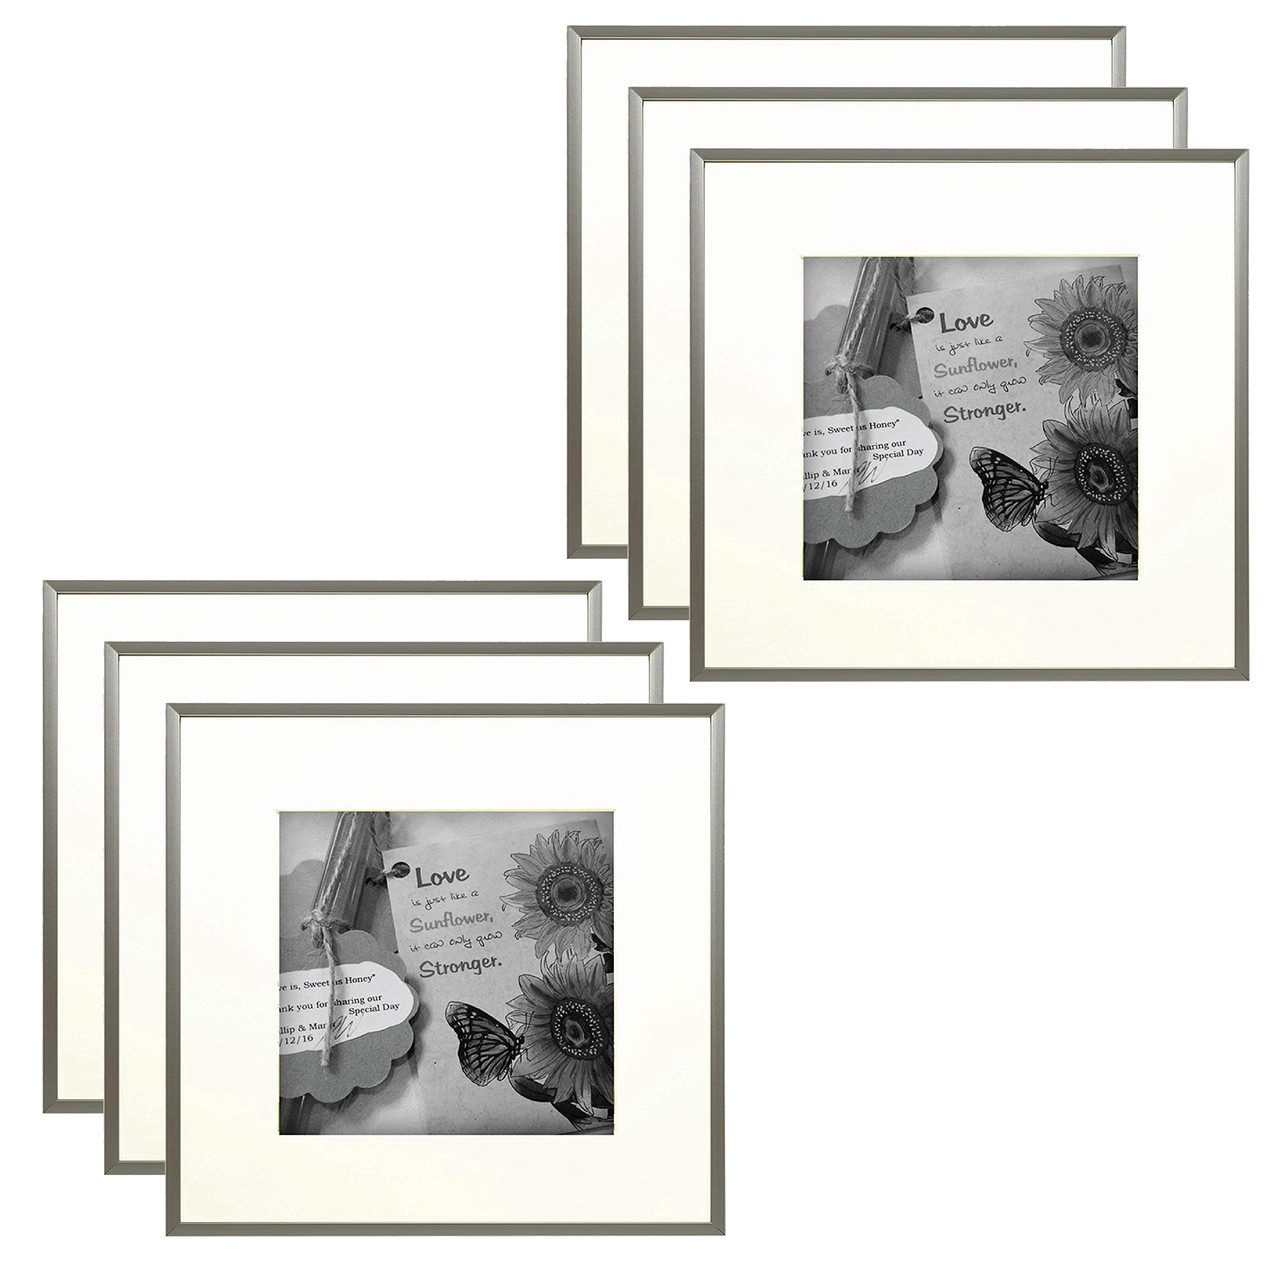 12x12 Frame for 8x8 Picture White Wood (9 Pcs per Box)